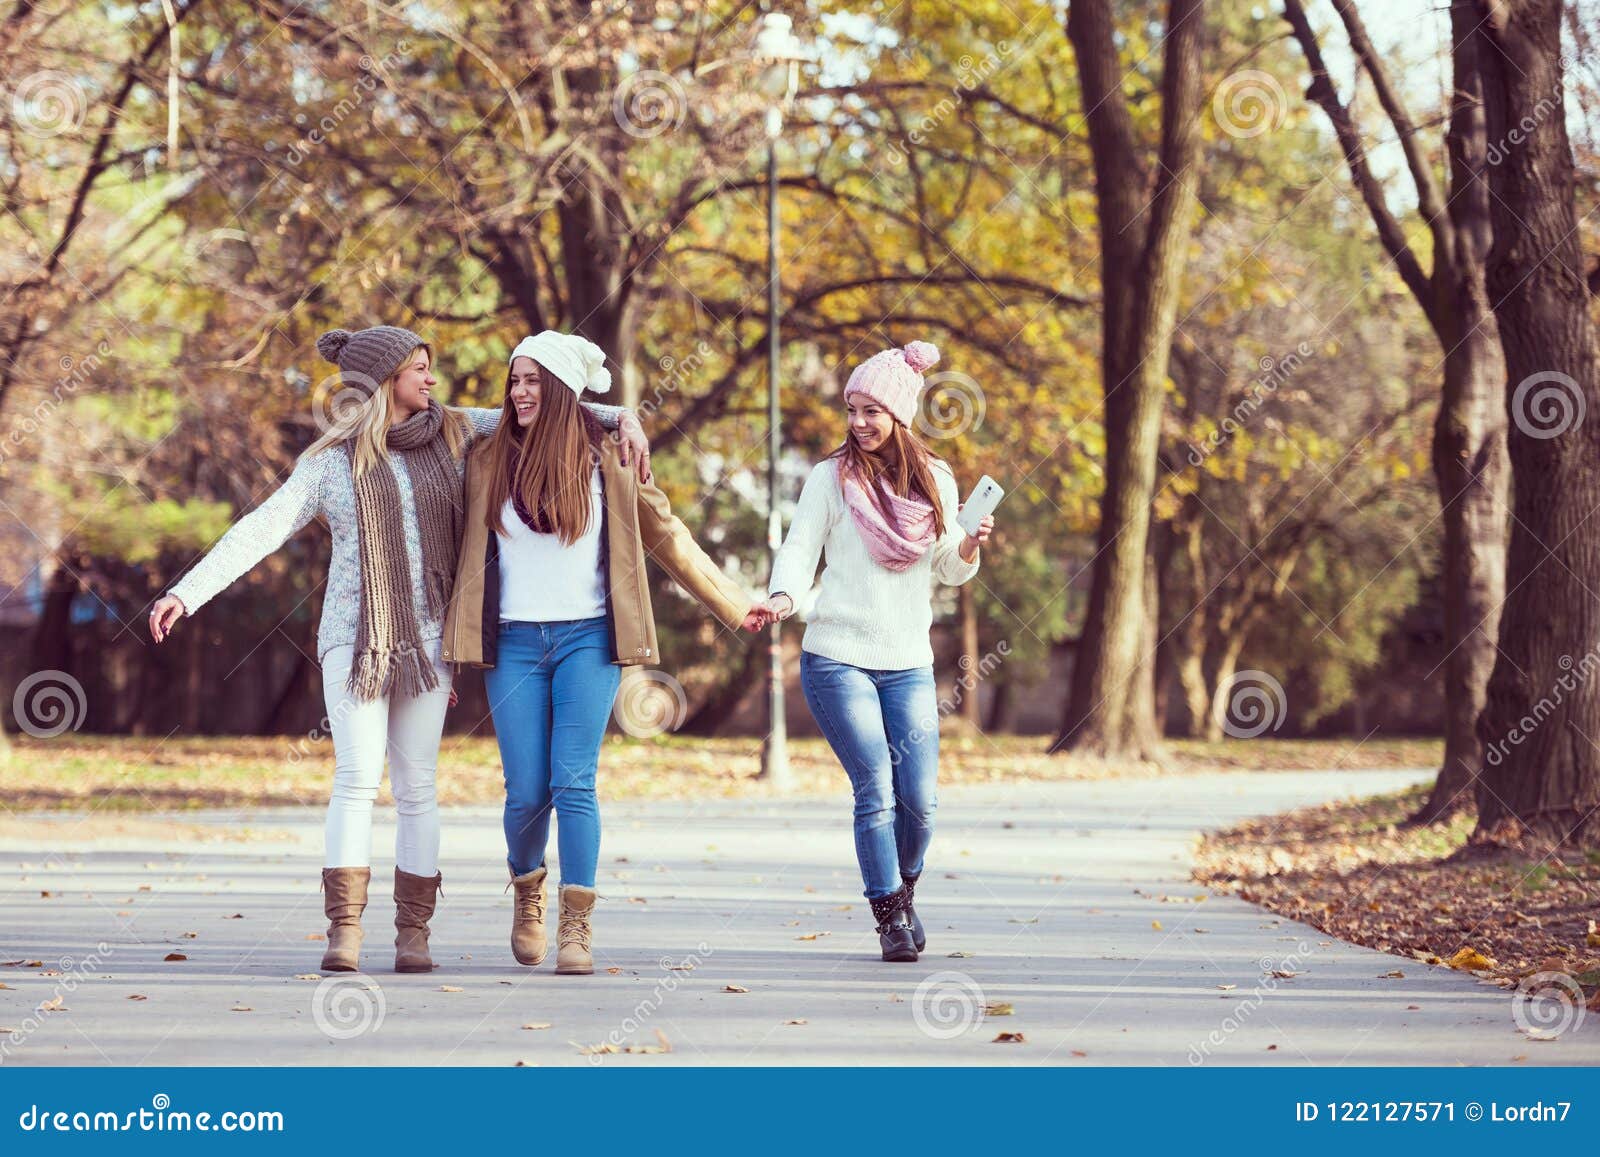 Group of Smiling College Girls Walking in the Park - Friendship Stock ...